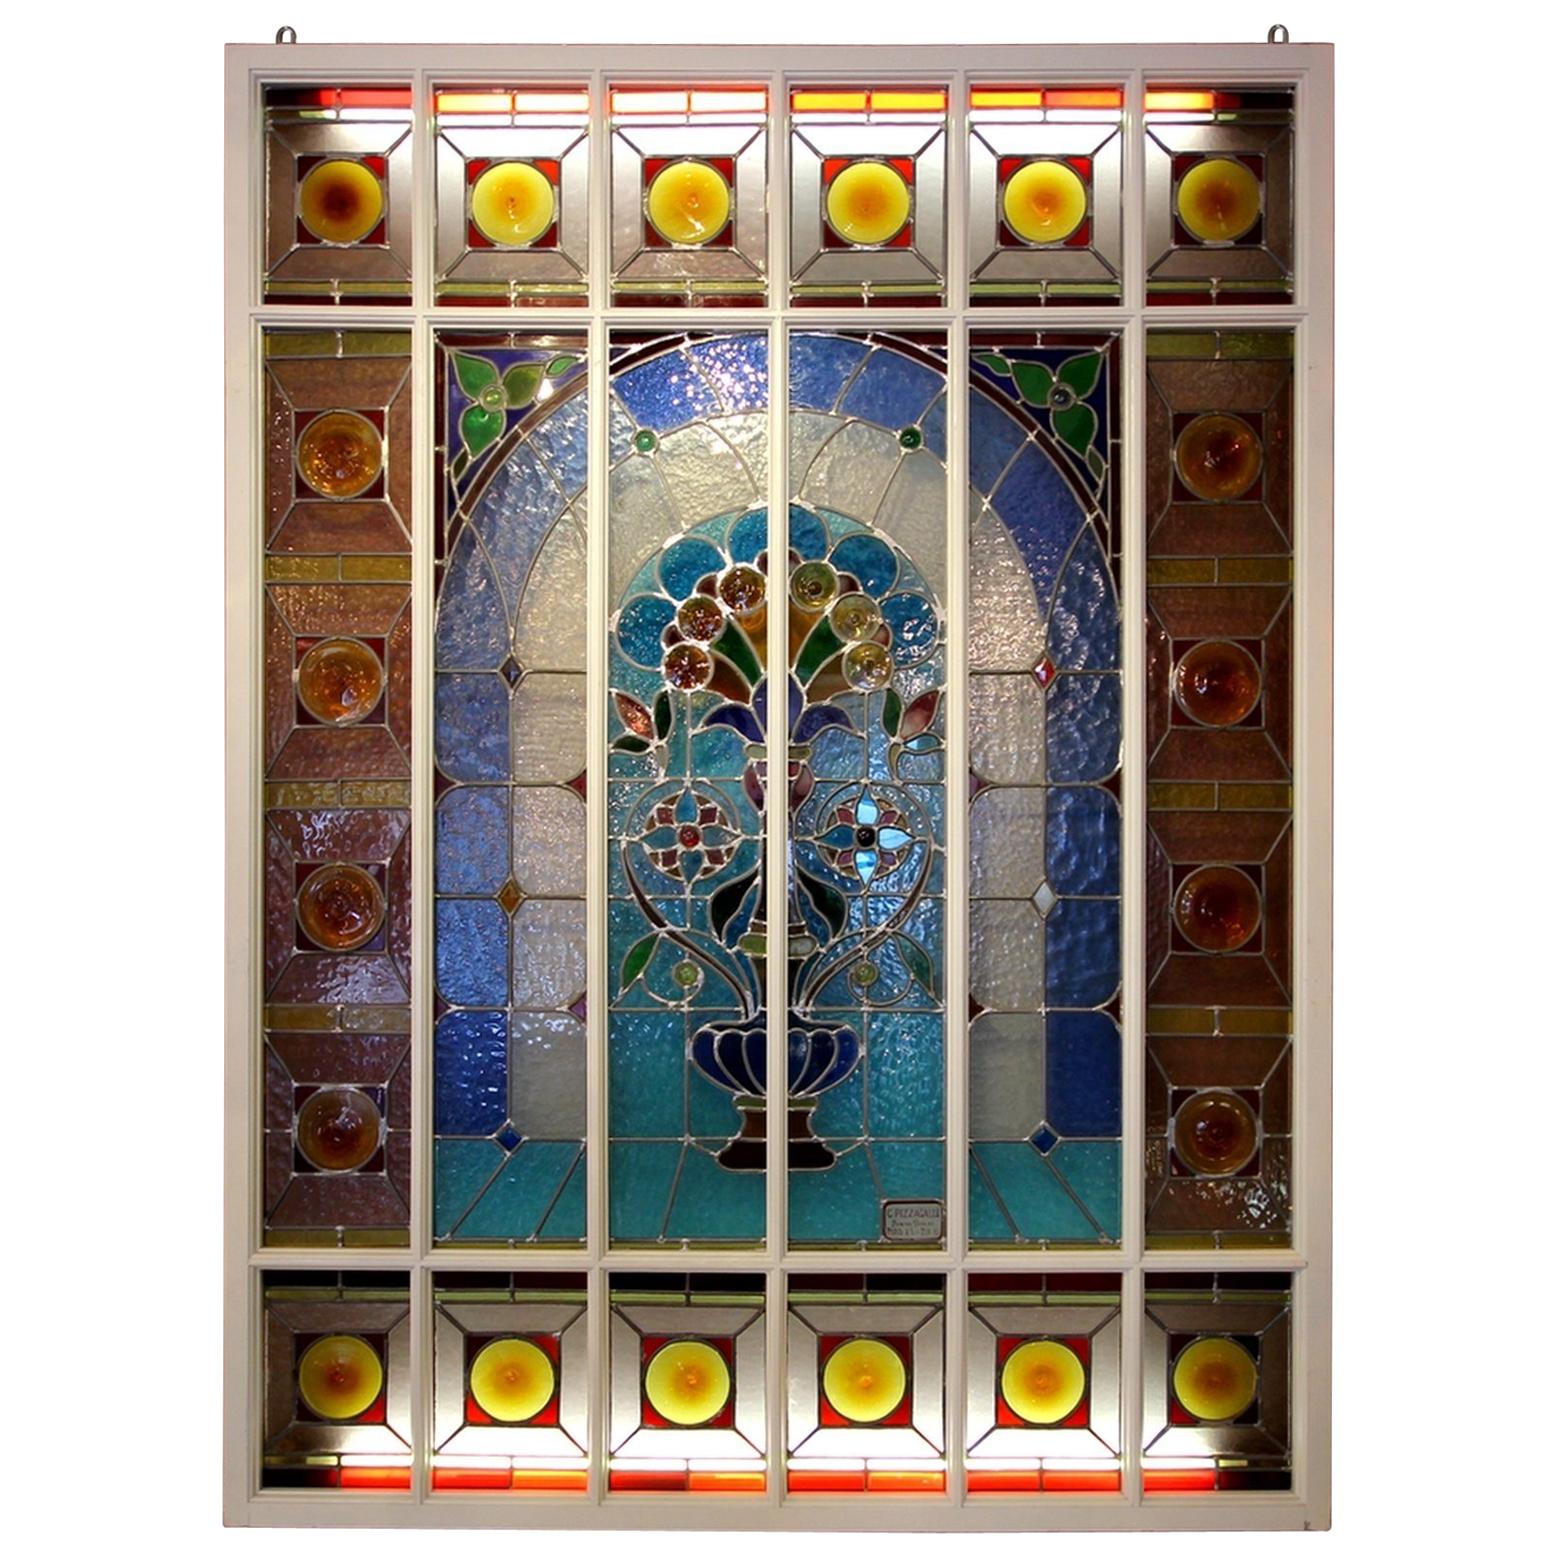 Stained Glass Panel by Carlo Pizzagalli, circa 1900